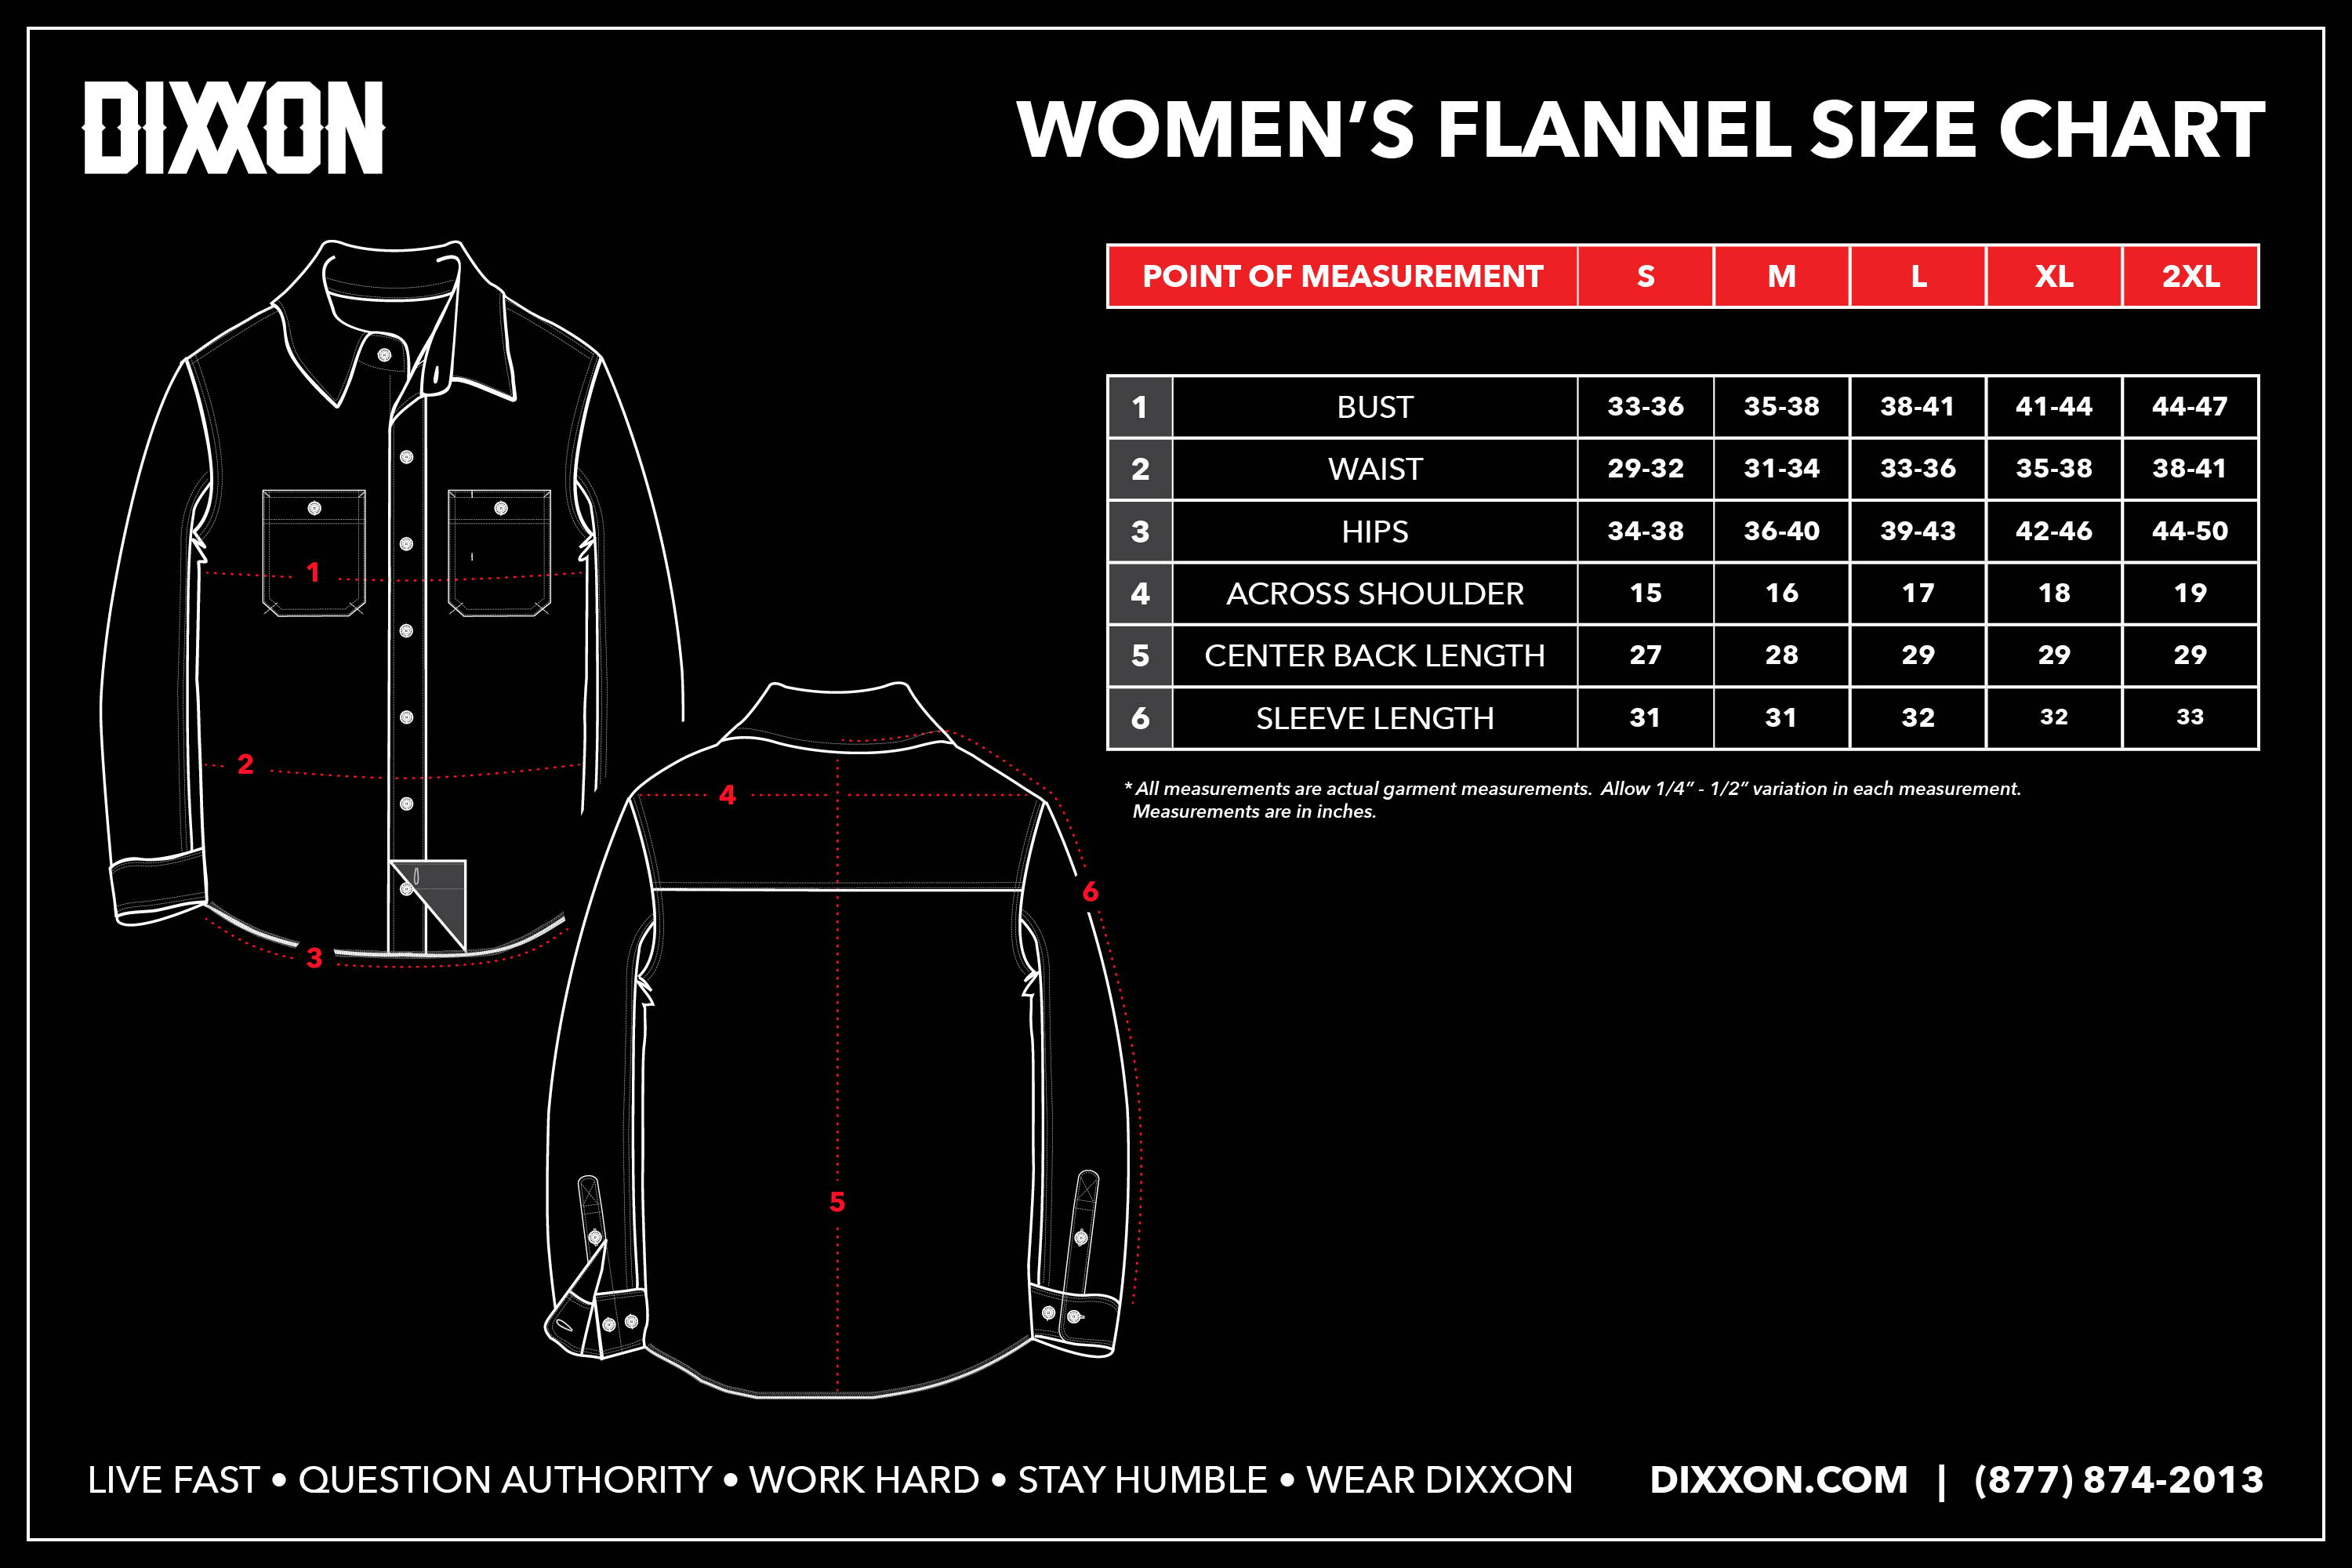 This size chart includes measurements for women's flannels, short sleeve bamboo shirts, and short sleeve party shirts.